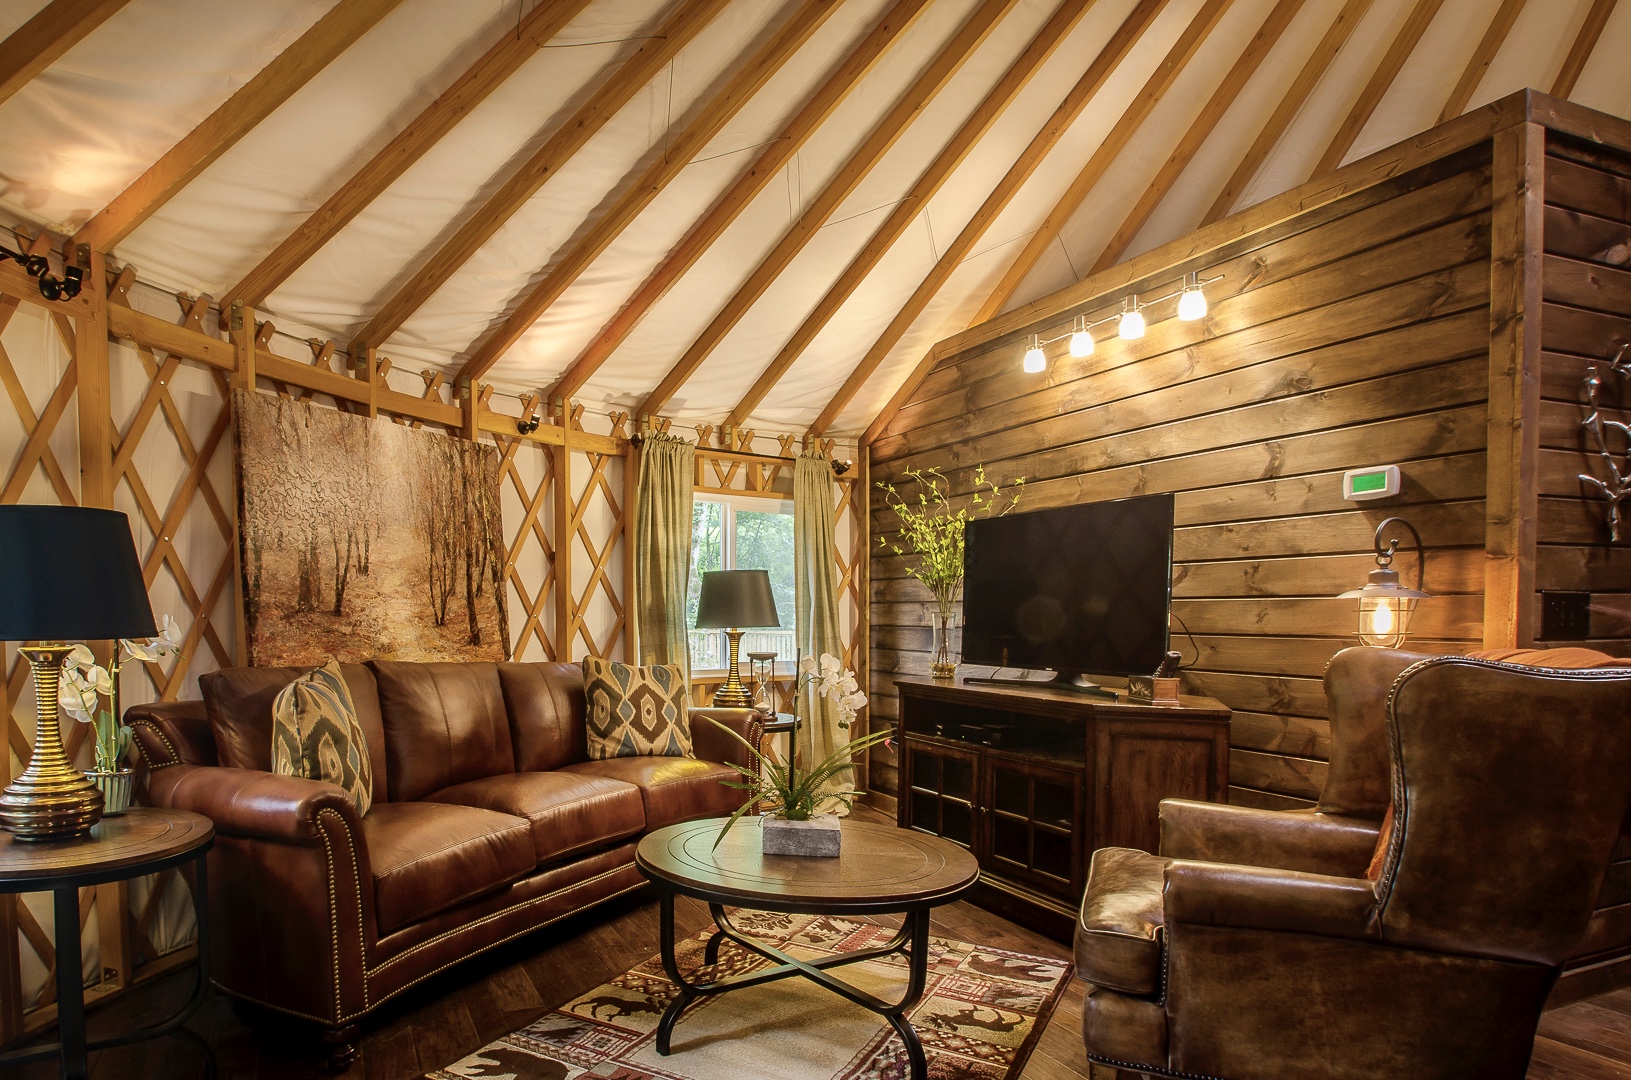 How To Make Your Yurt Feel Bigger With Home Decor